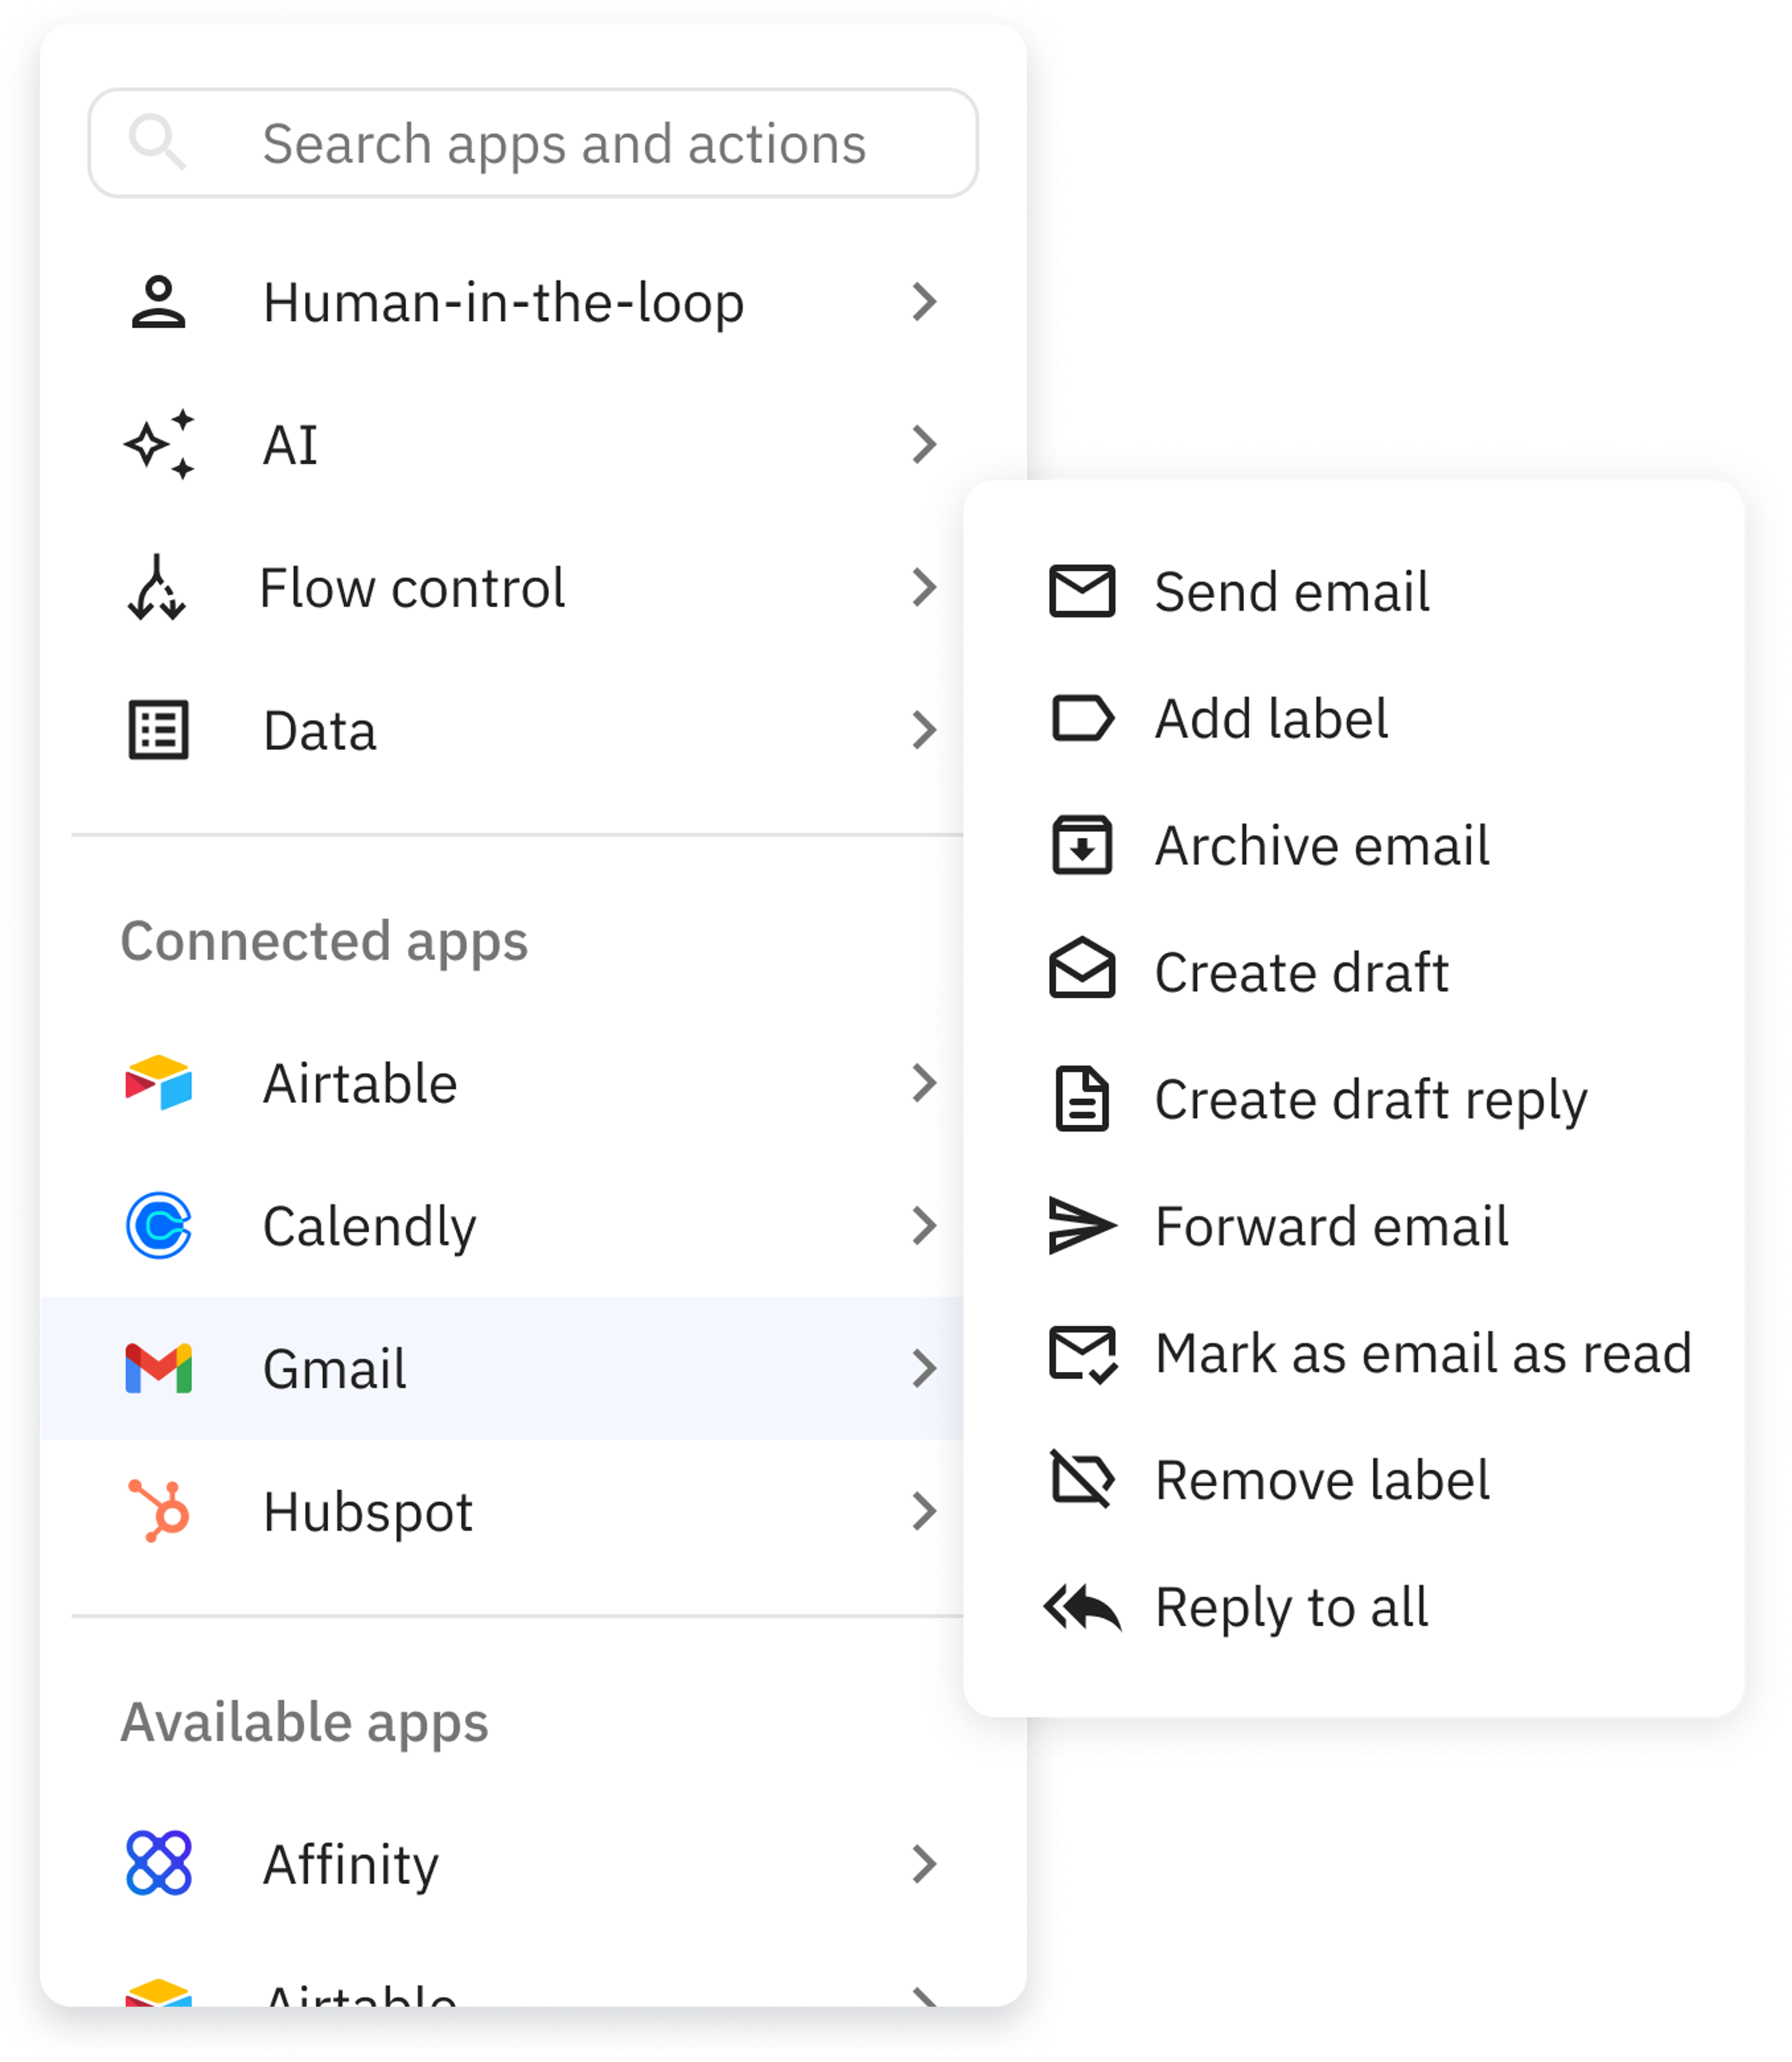 Automate actions across all your apps